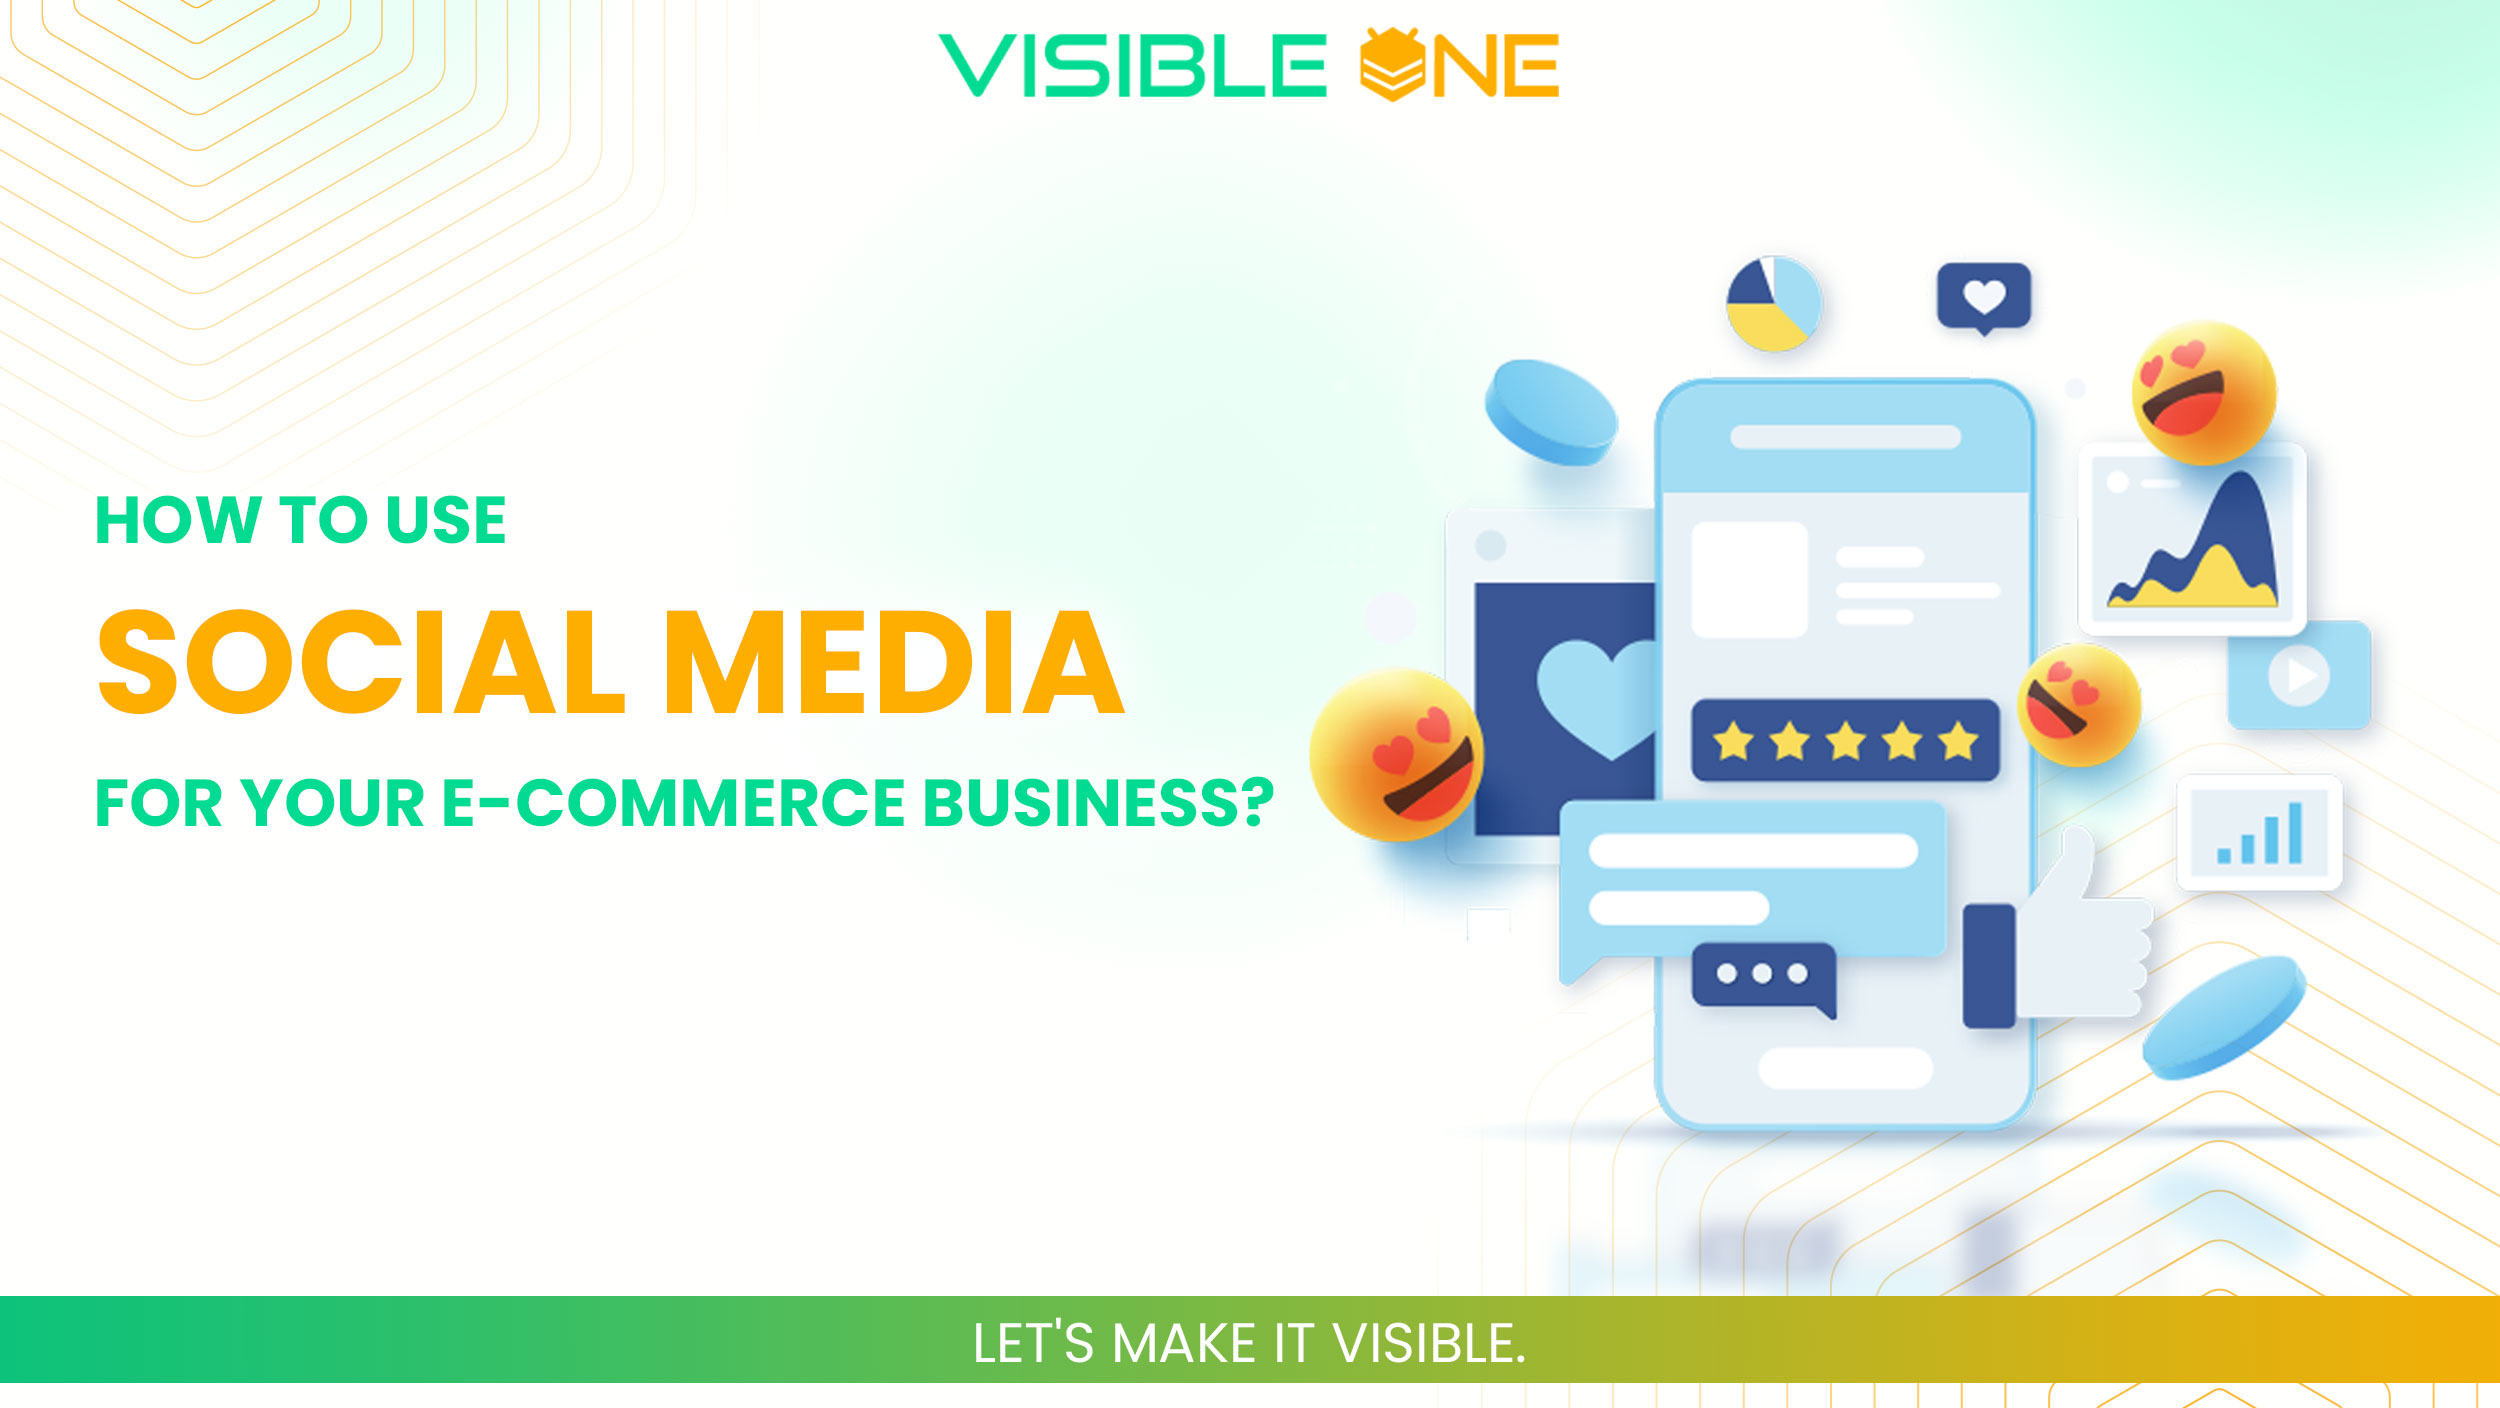 How to Use Social Media for Your E-Commerce Business?